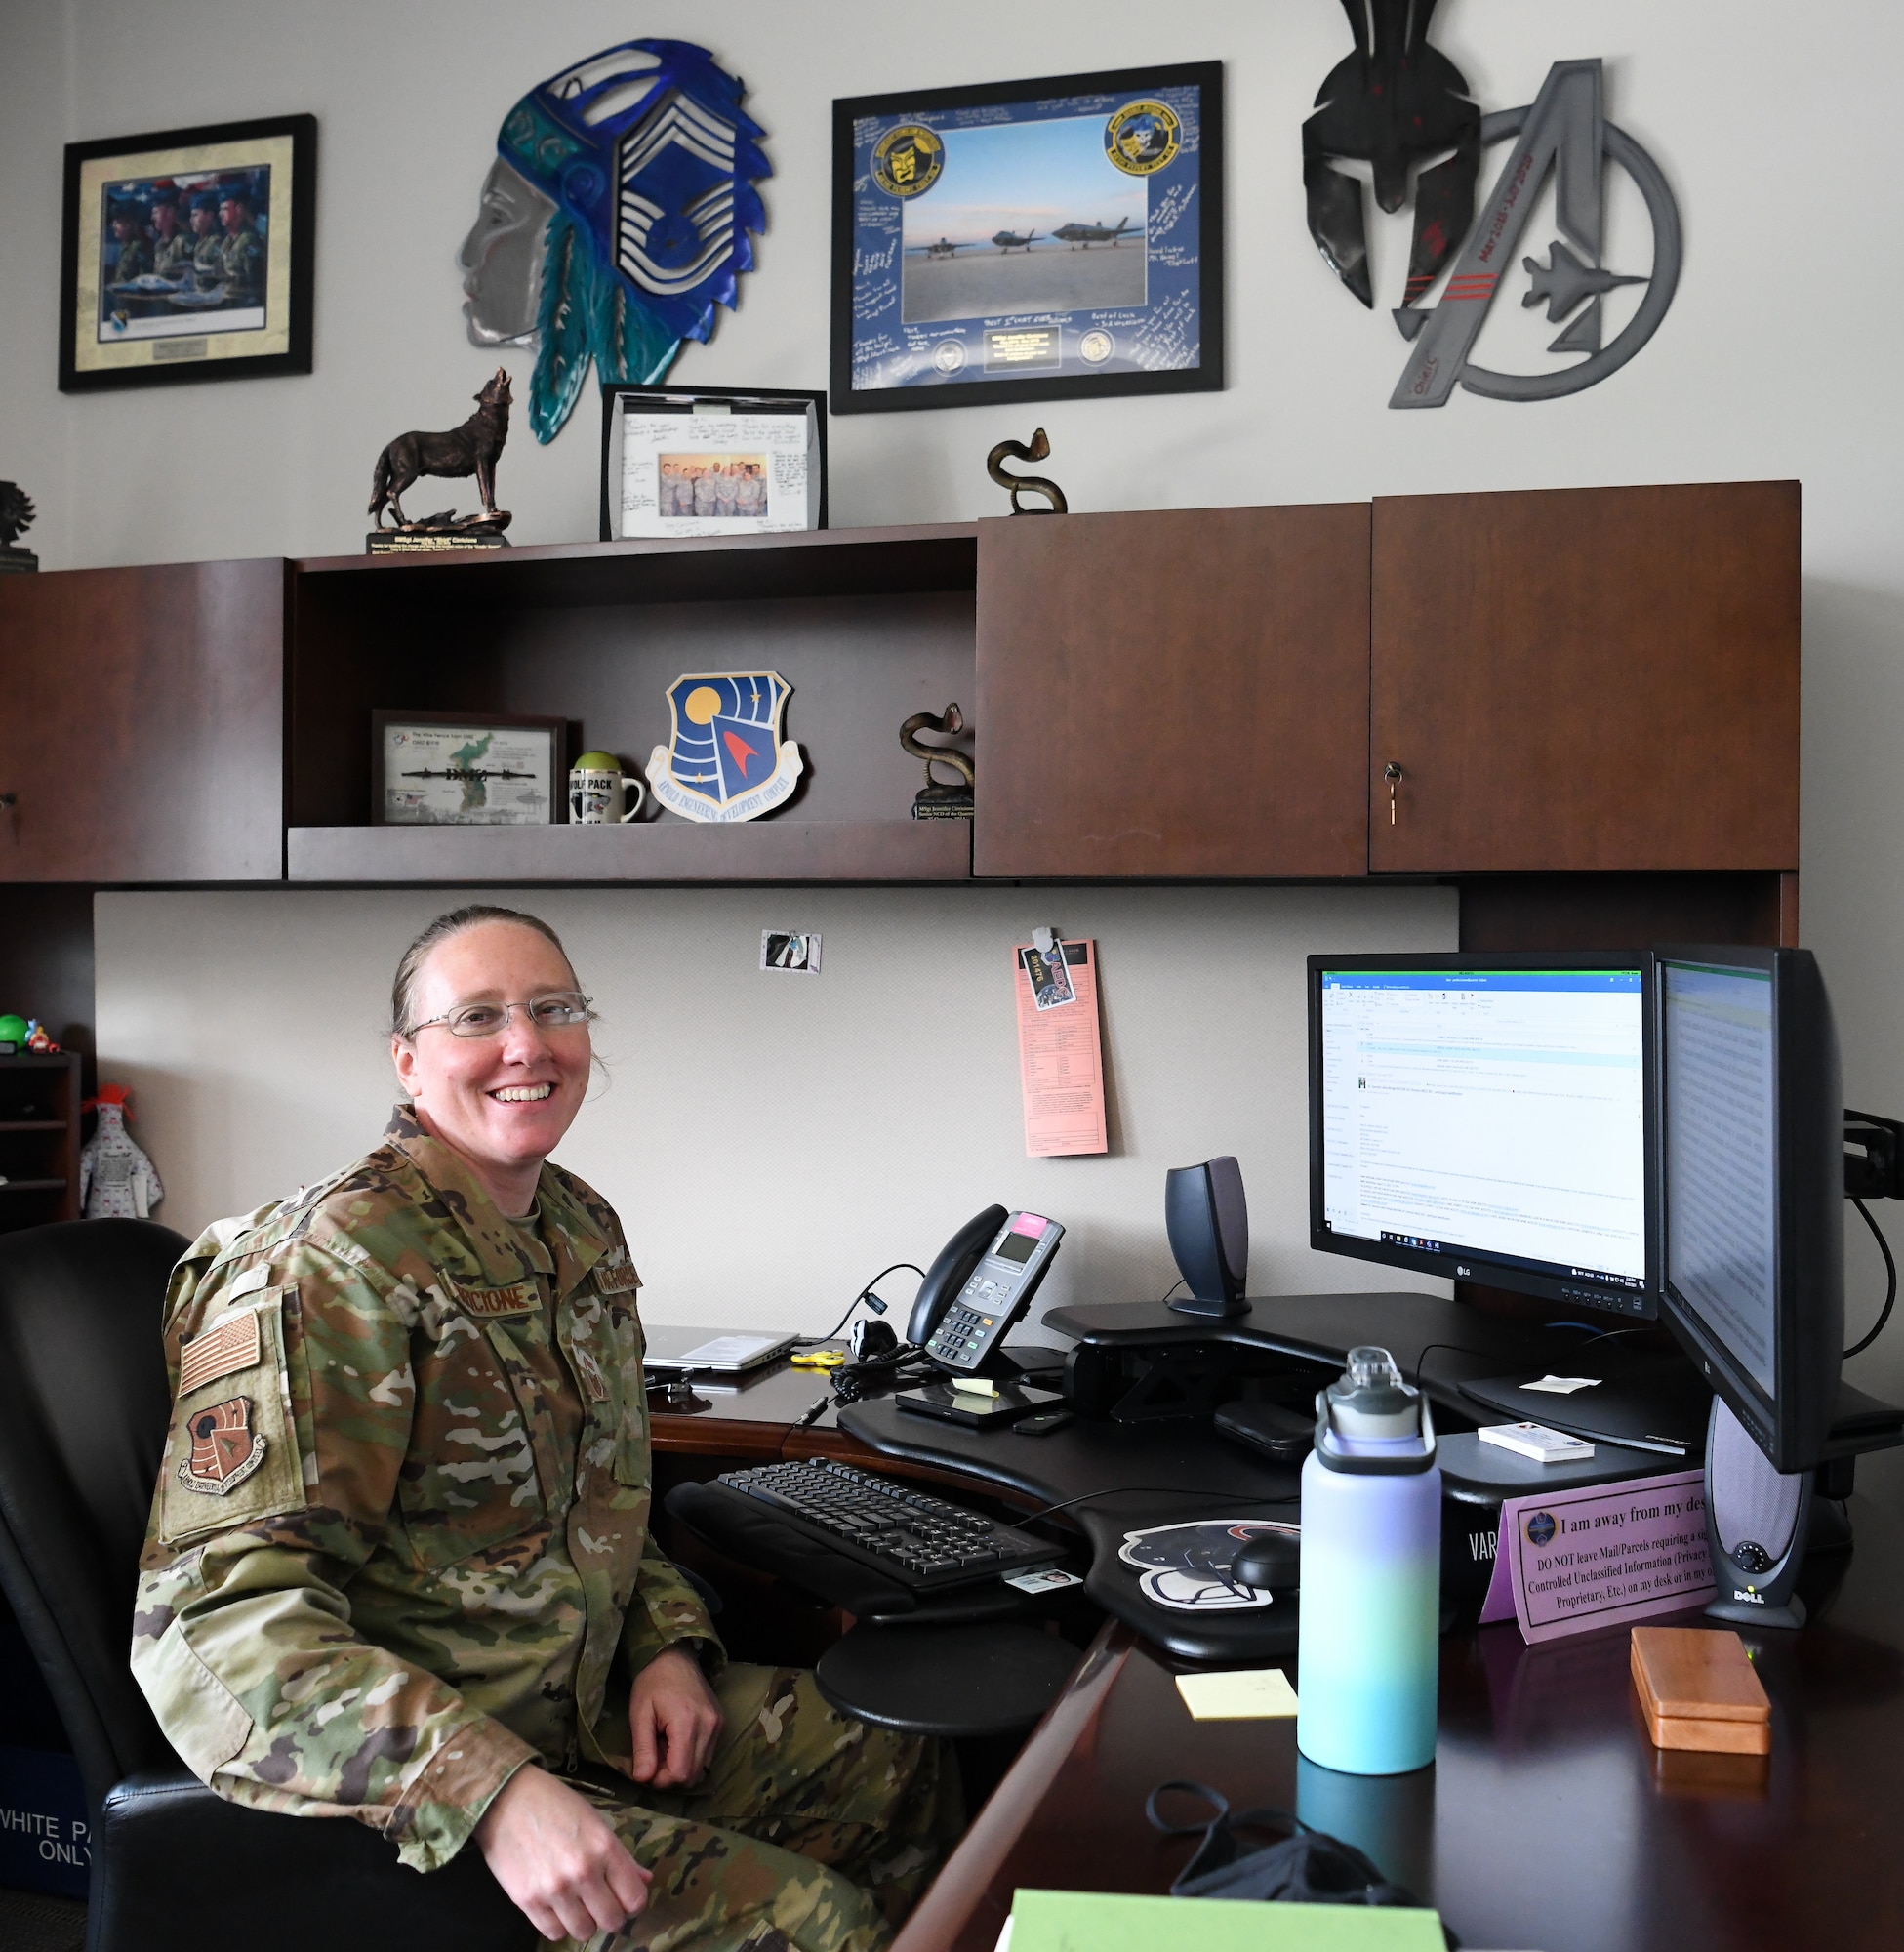 Chief Master Sgt. Jennifer Cirricione, the new Senior Enlisted Leader of Arnold Engineering Development Complex, sits at her desk at Arnold Air Force Base, Tenn., Aug. 25, 2021. (U.S. Air Force photo by Jill Pickett)